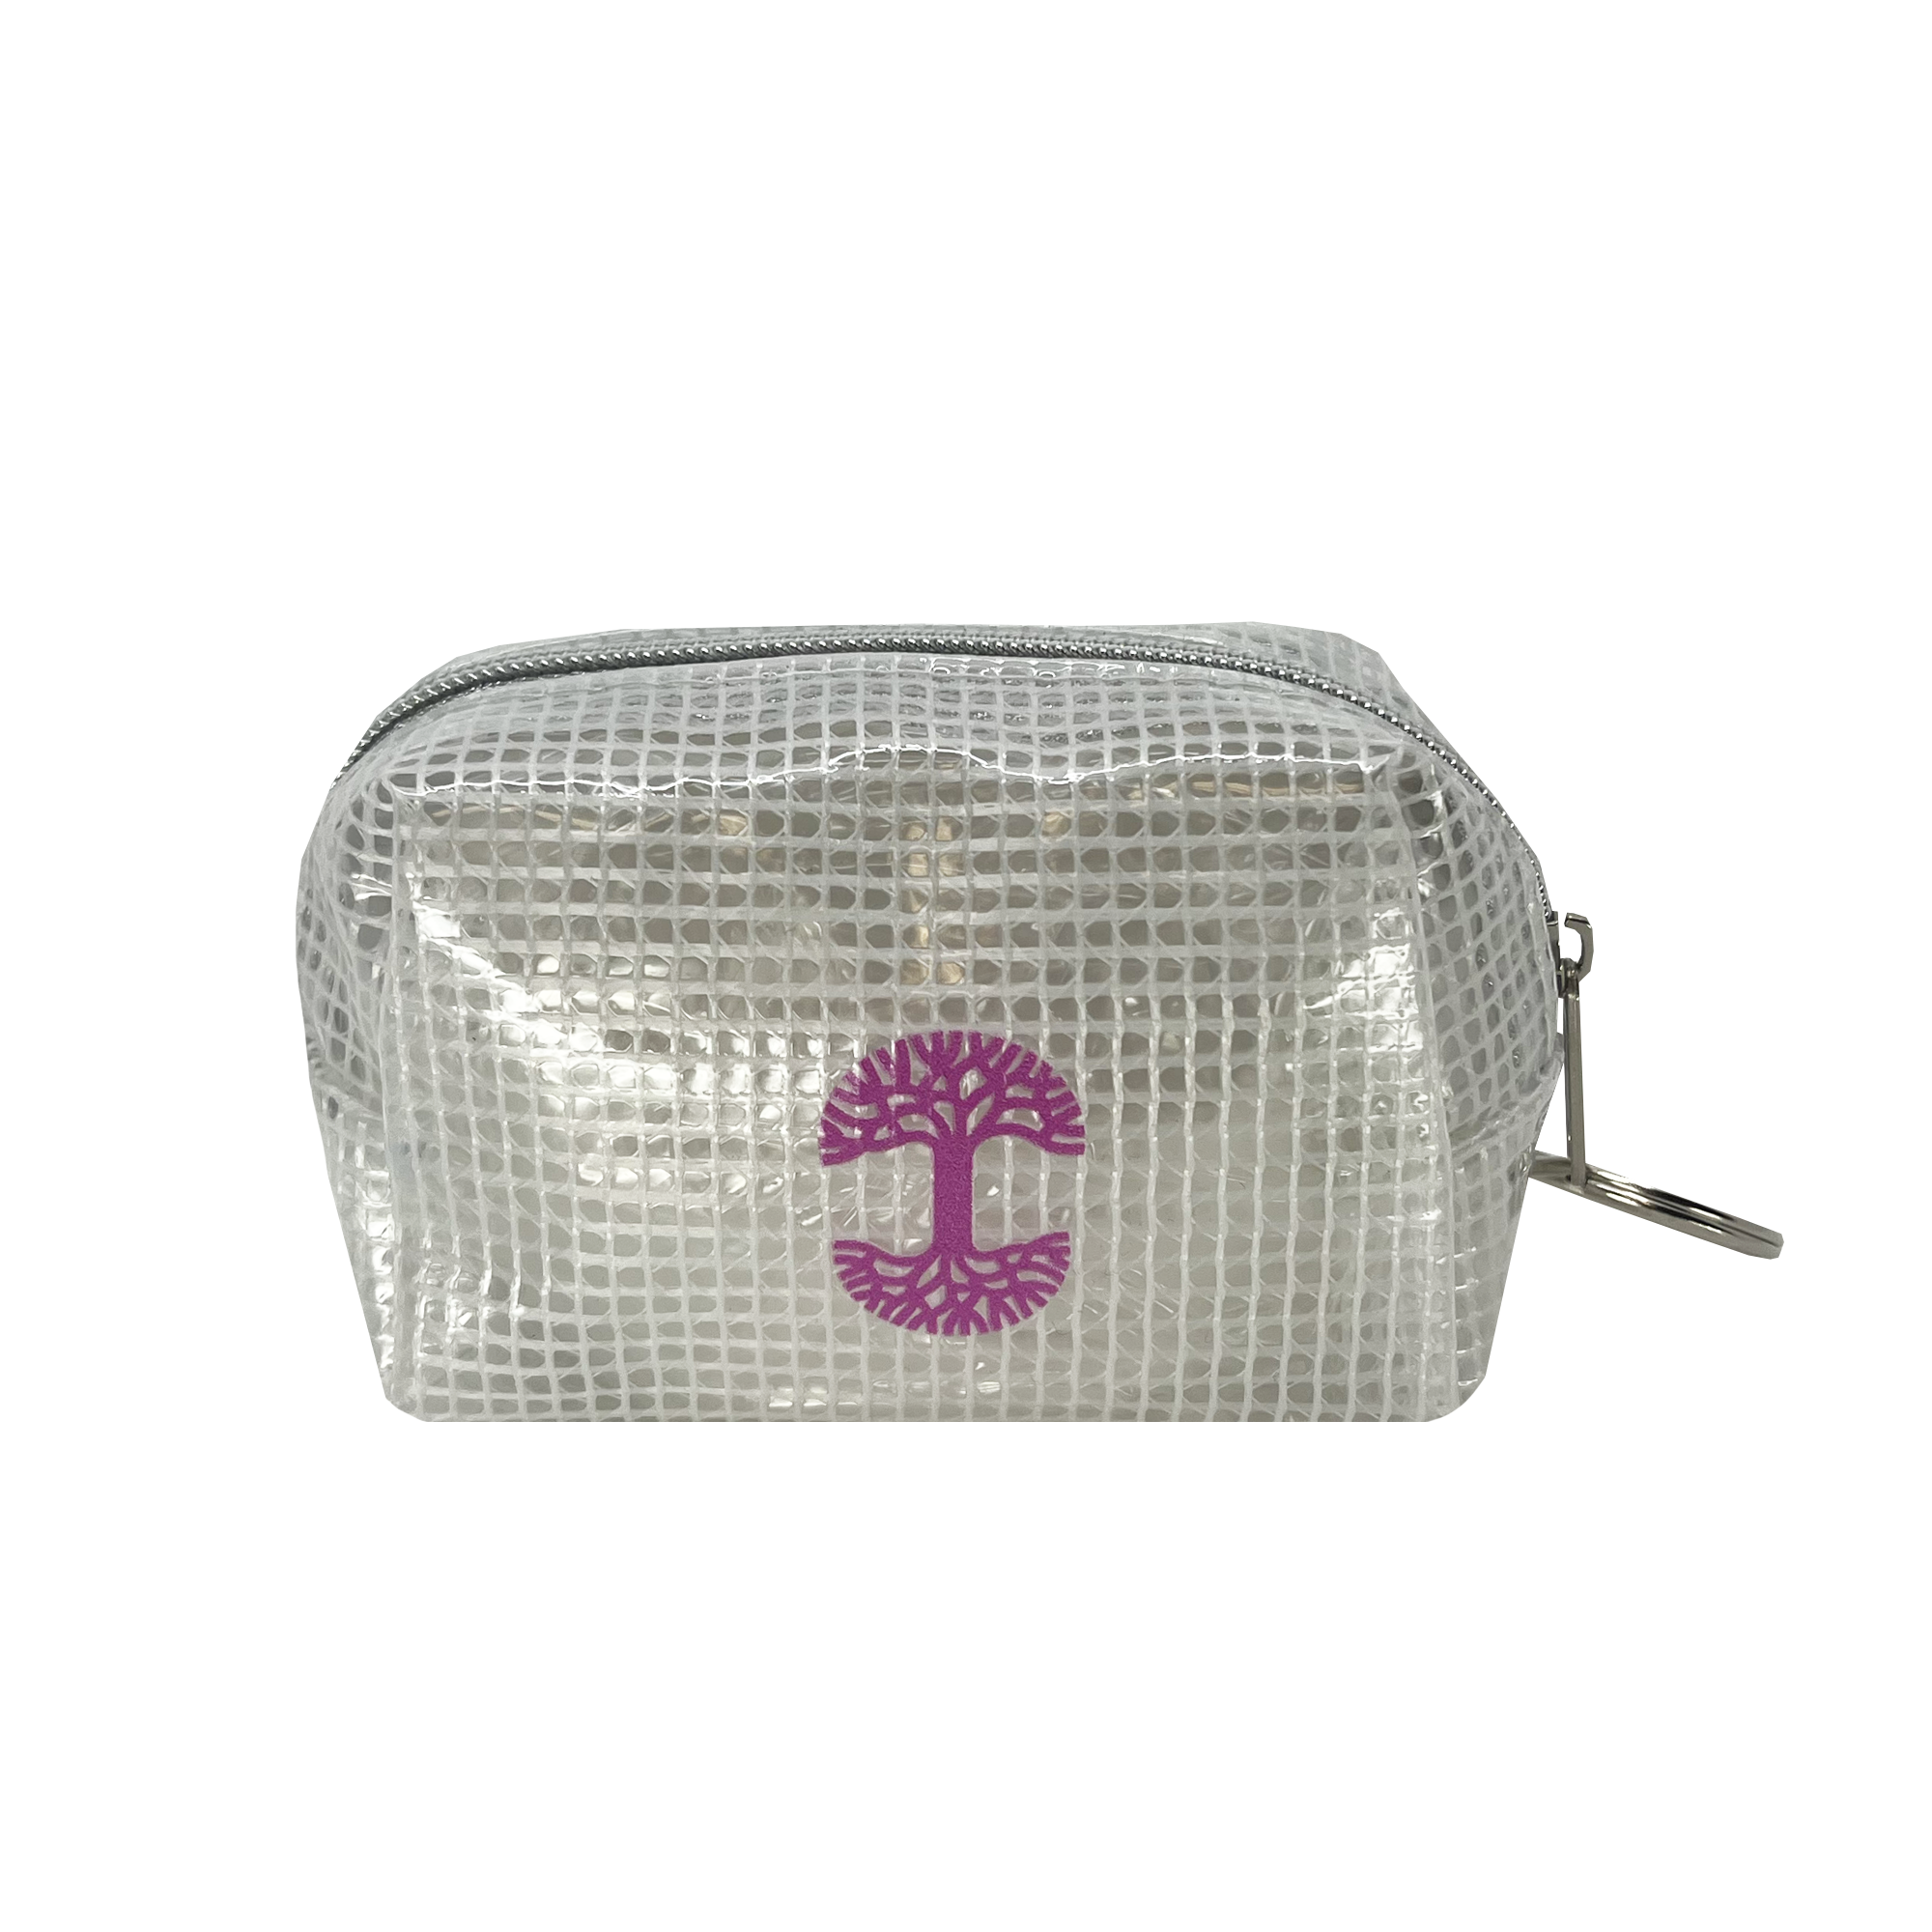 Alternate side of a clear plastic zippered travel pouch with a pink Oaklandish tree logo. 